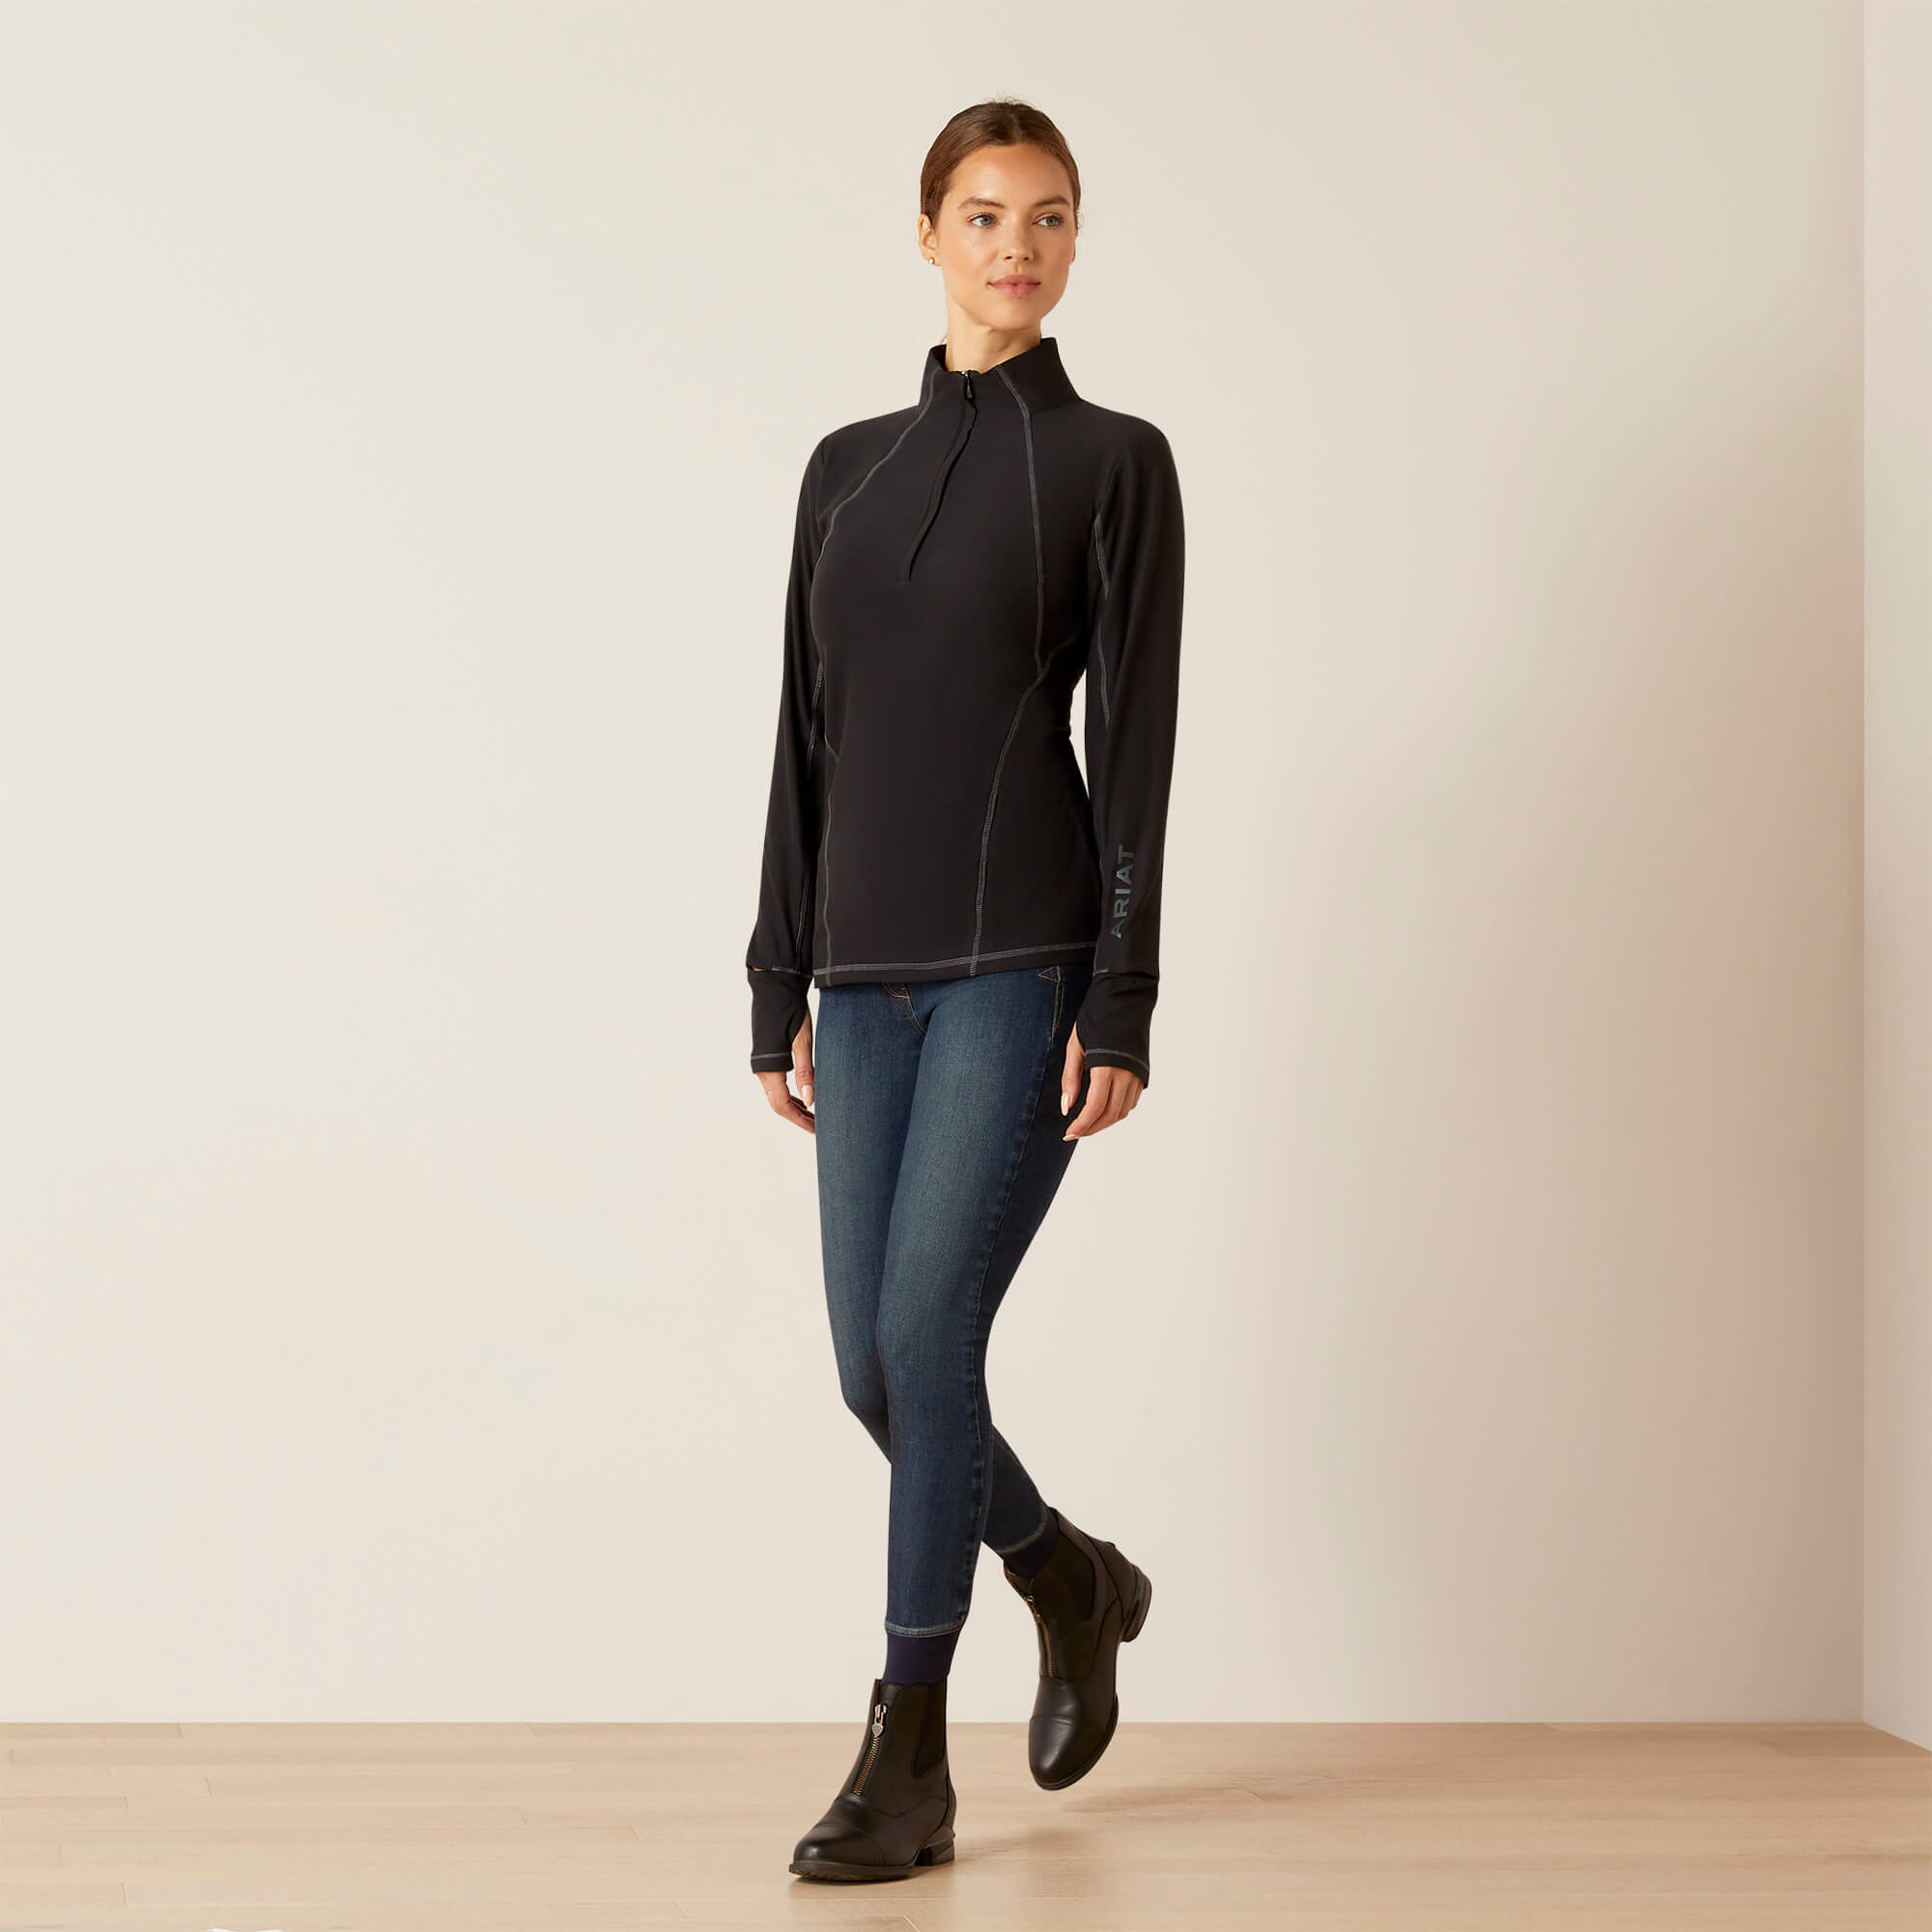 Ariat Ladies Ardent Long Sleeve Baselayer